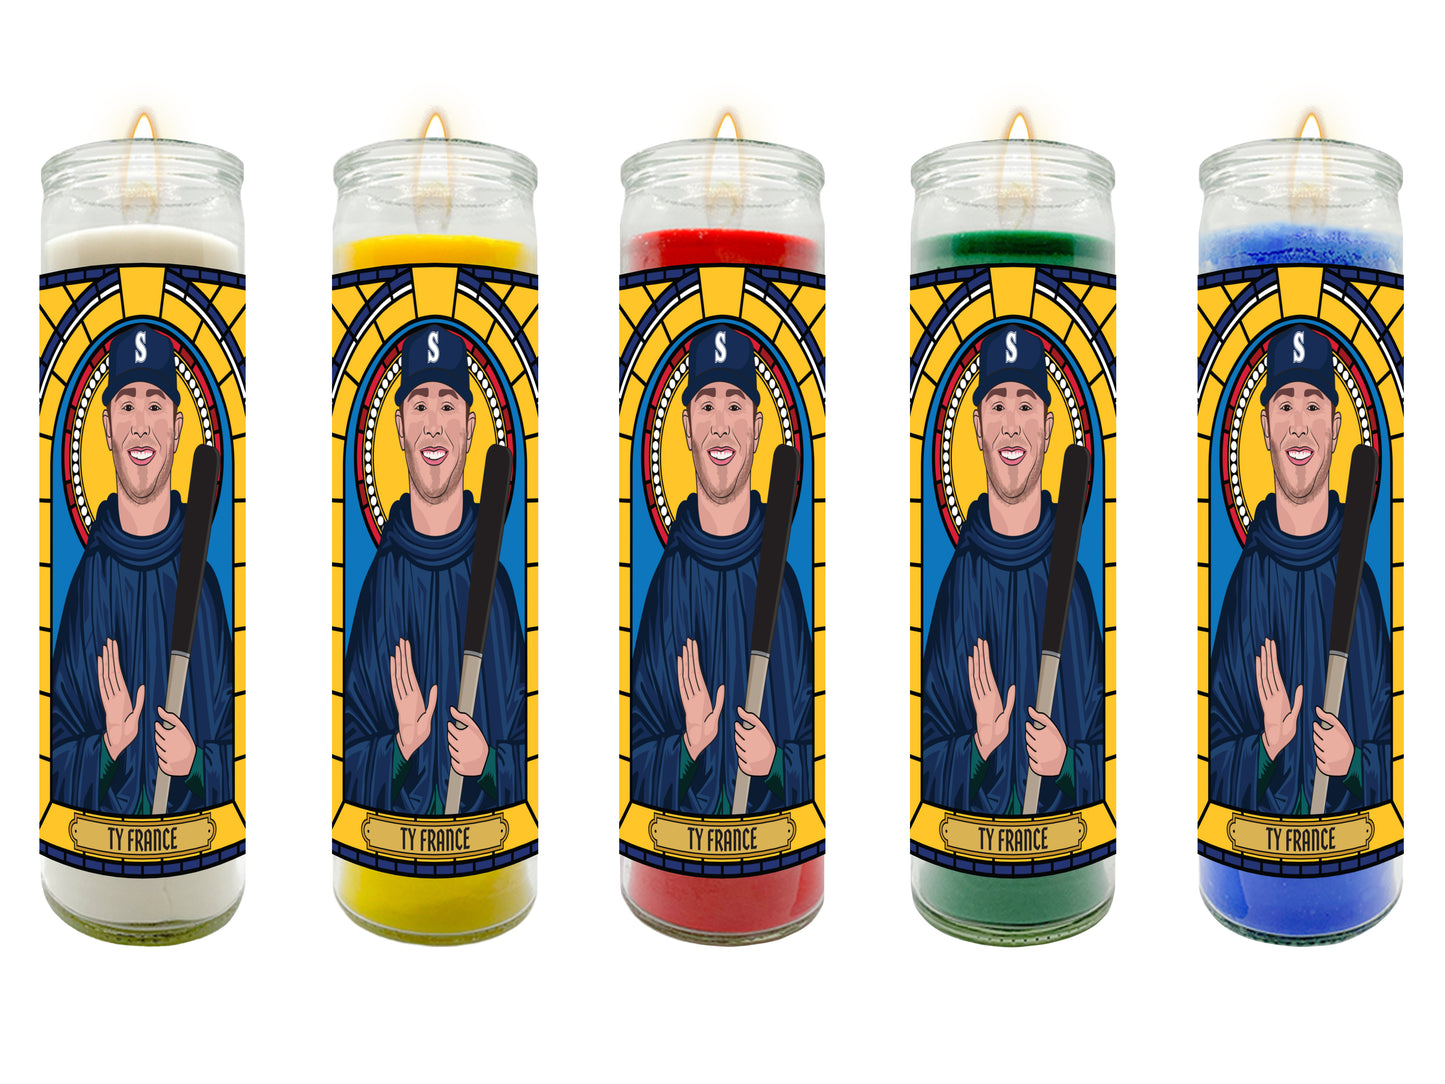 Seattle Mariners Illustrated Prayer Candle Series